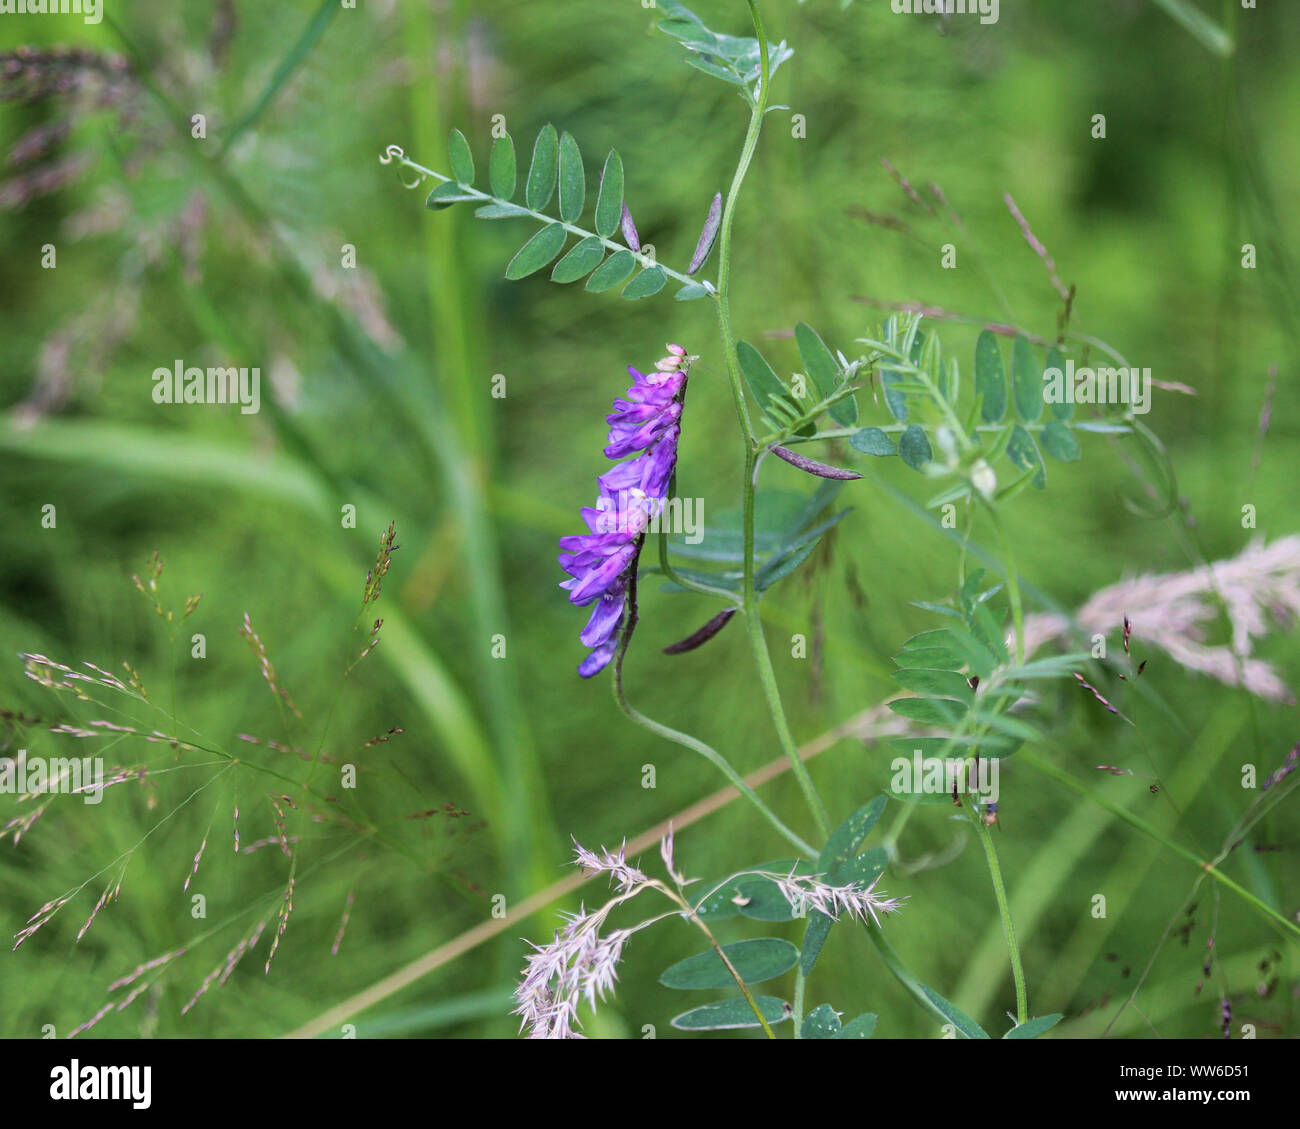 Close up of Vicia villosa flower, known as the hairy vetch, fodder vetch or winter vetch Stock Photo